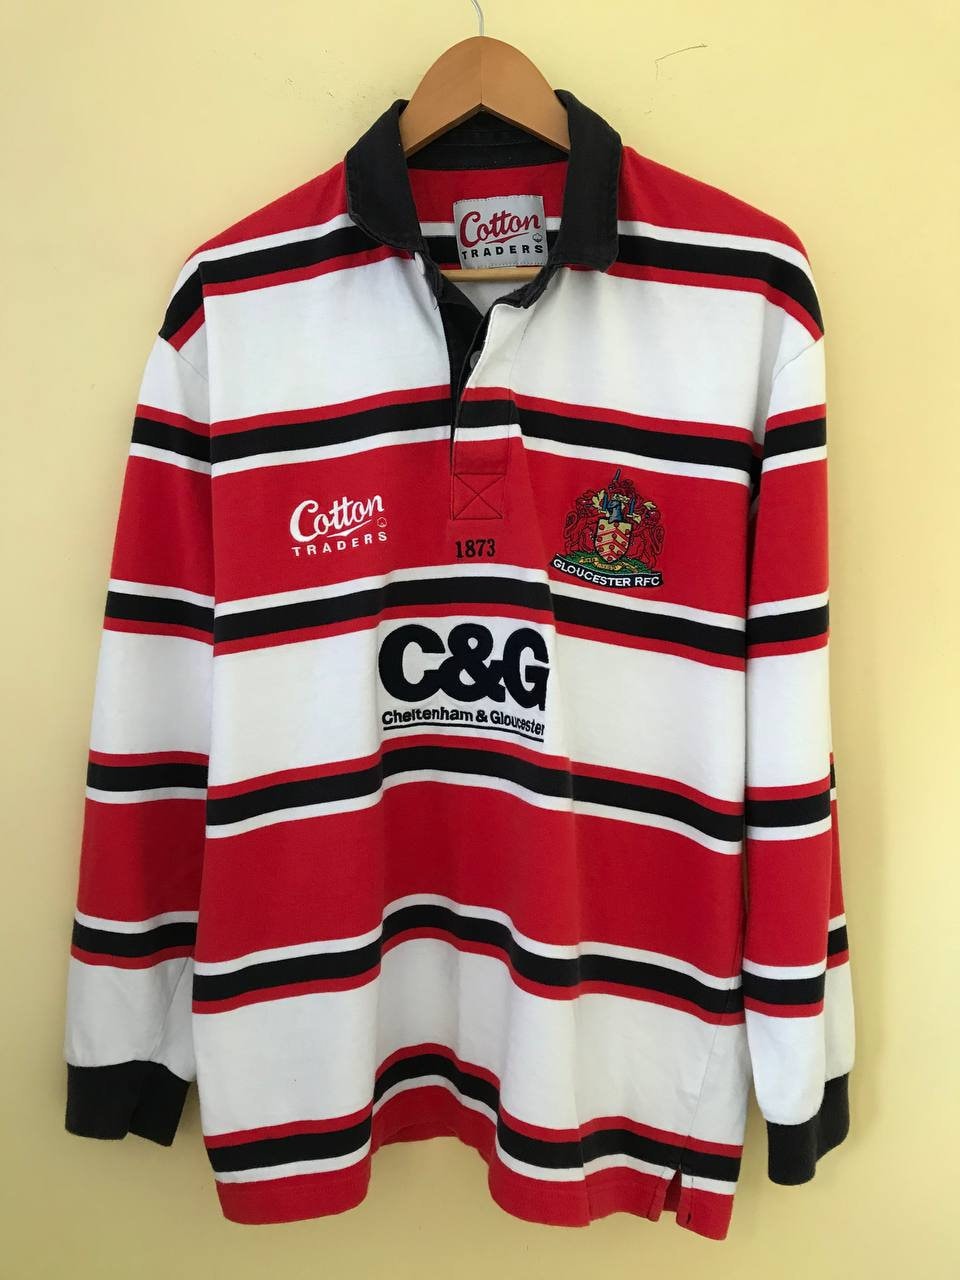 Gloucester Rugby Union Shirt Cotton Traders Size 2XL Jersey Vintage England